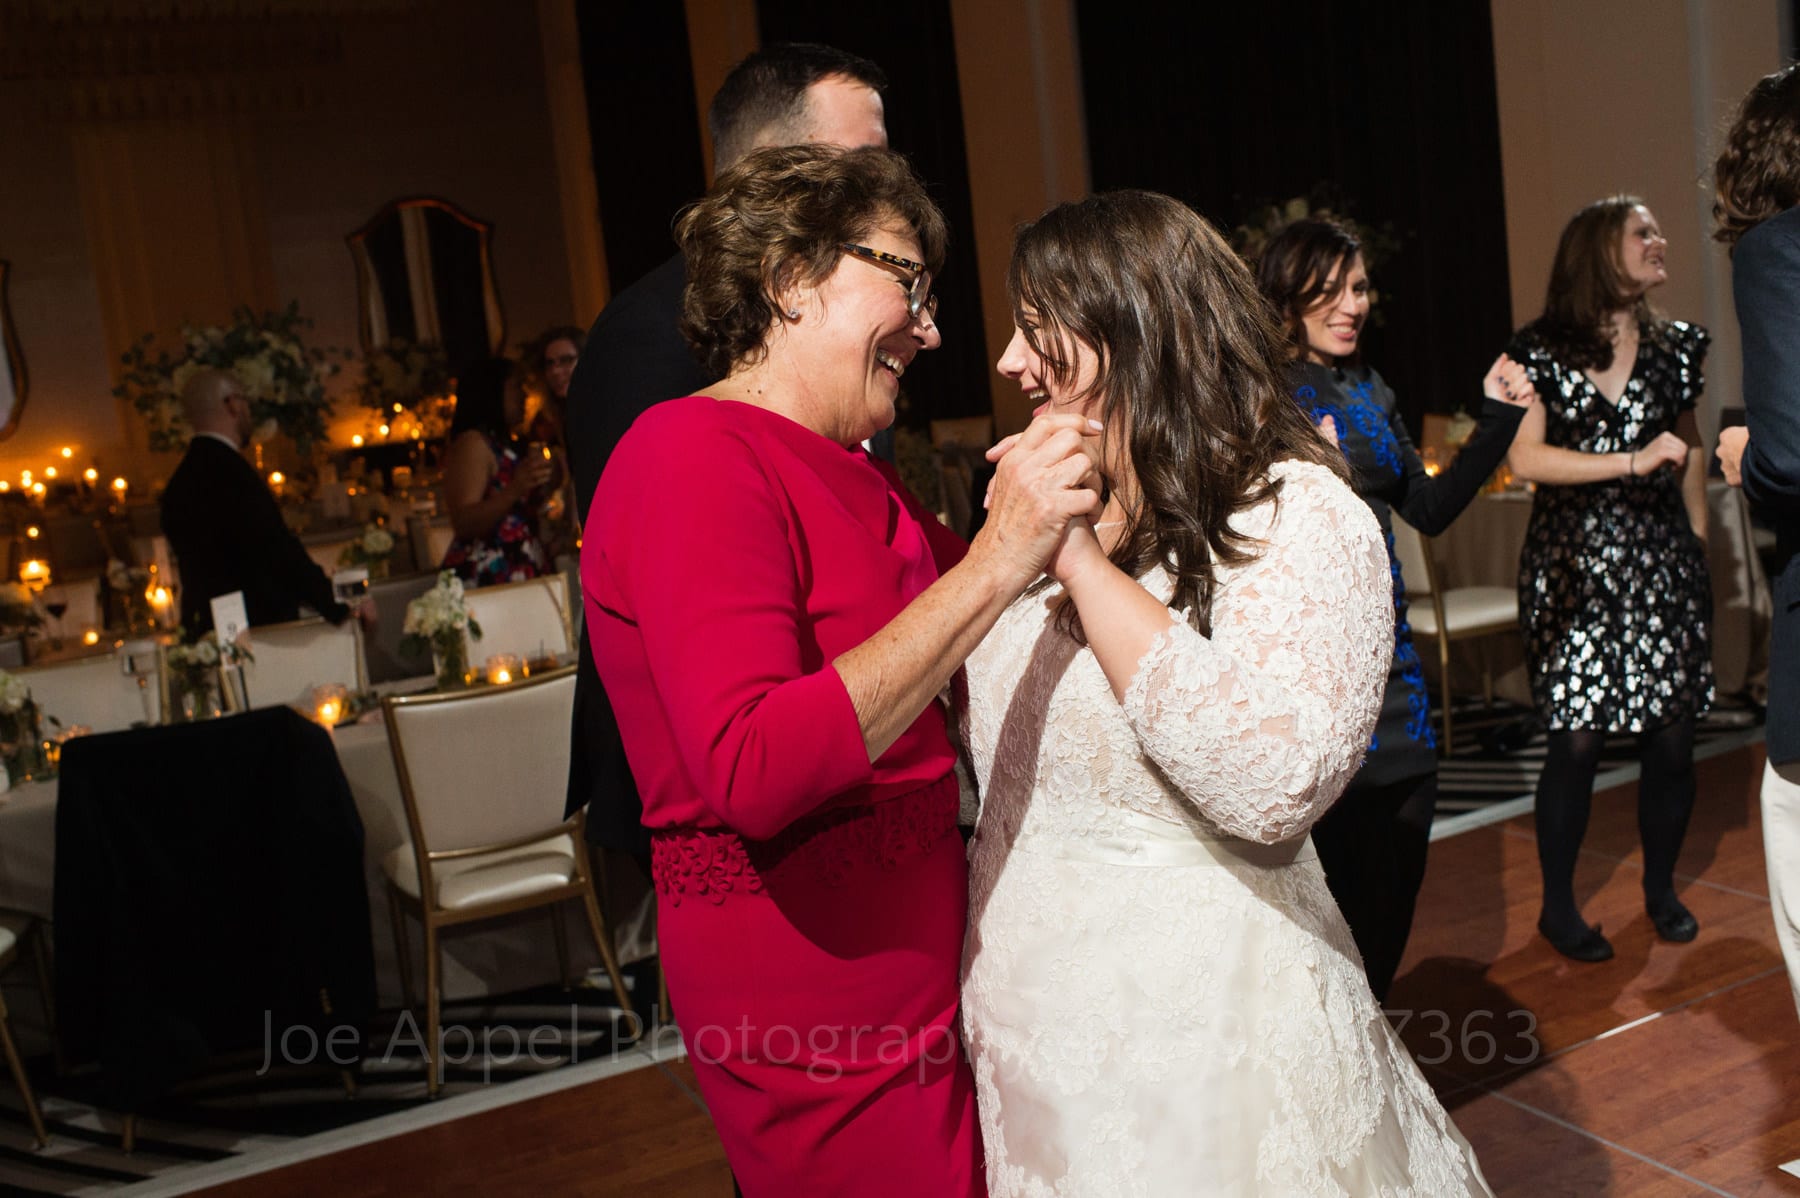 a bride in a white lace dress dances with her mother who is wearing glasses and a red sleeved dress.